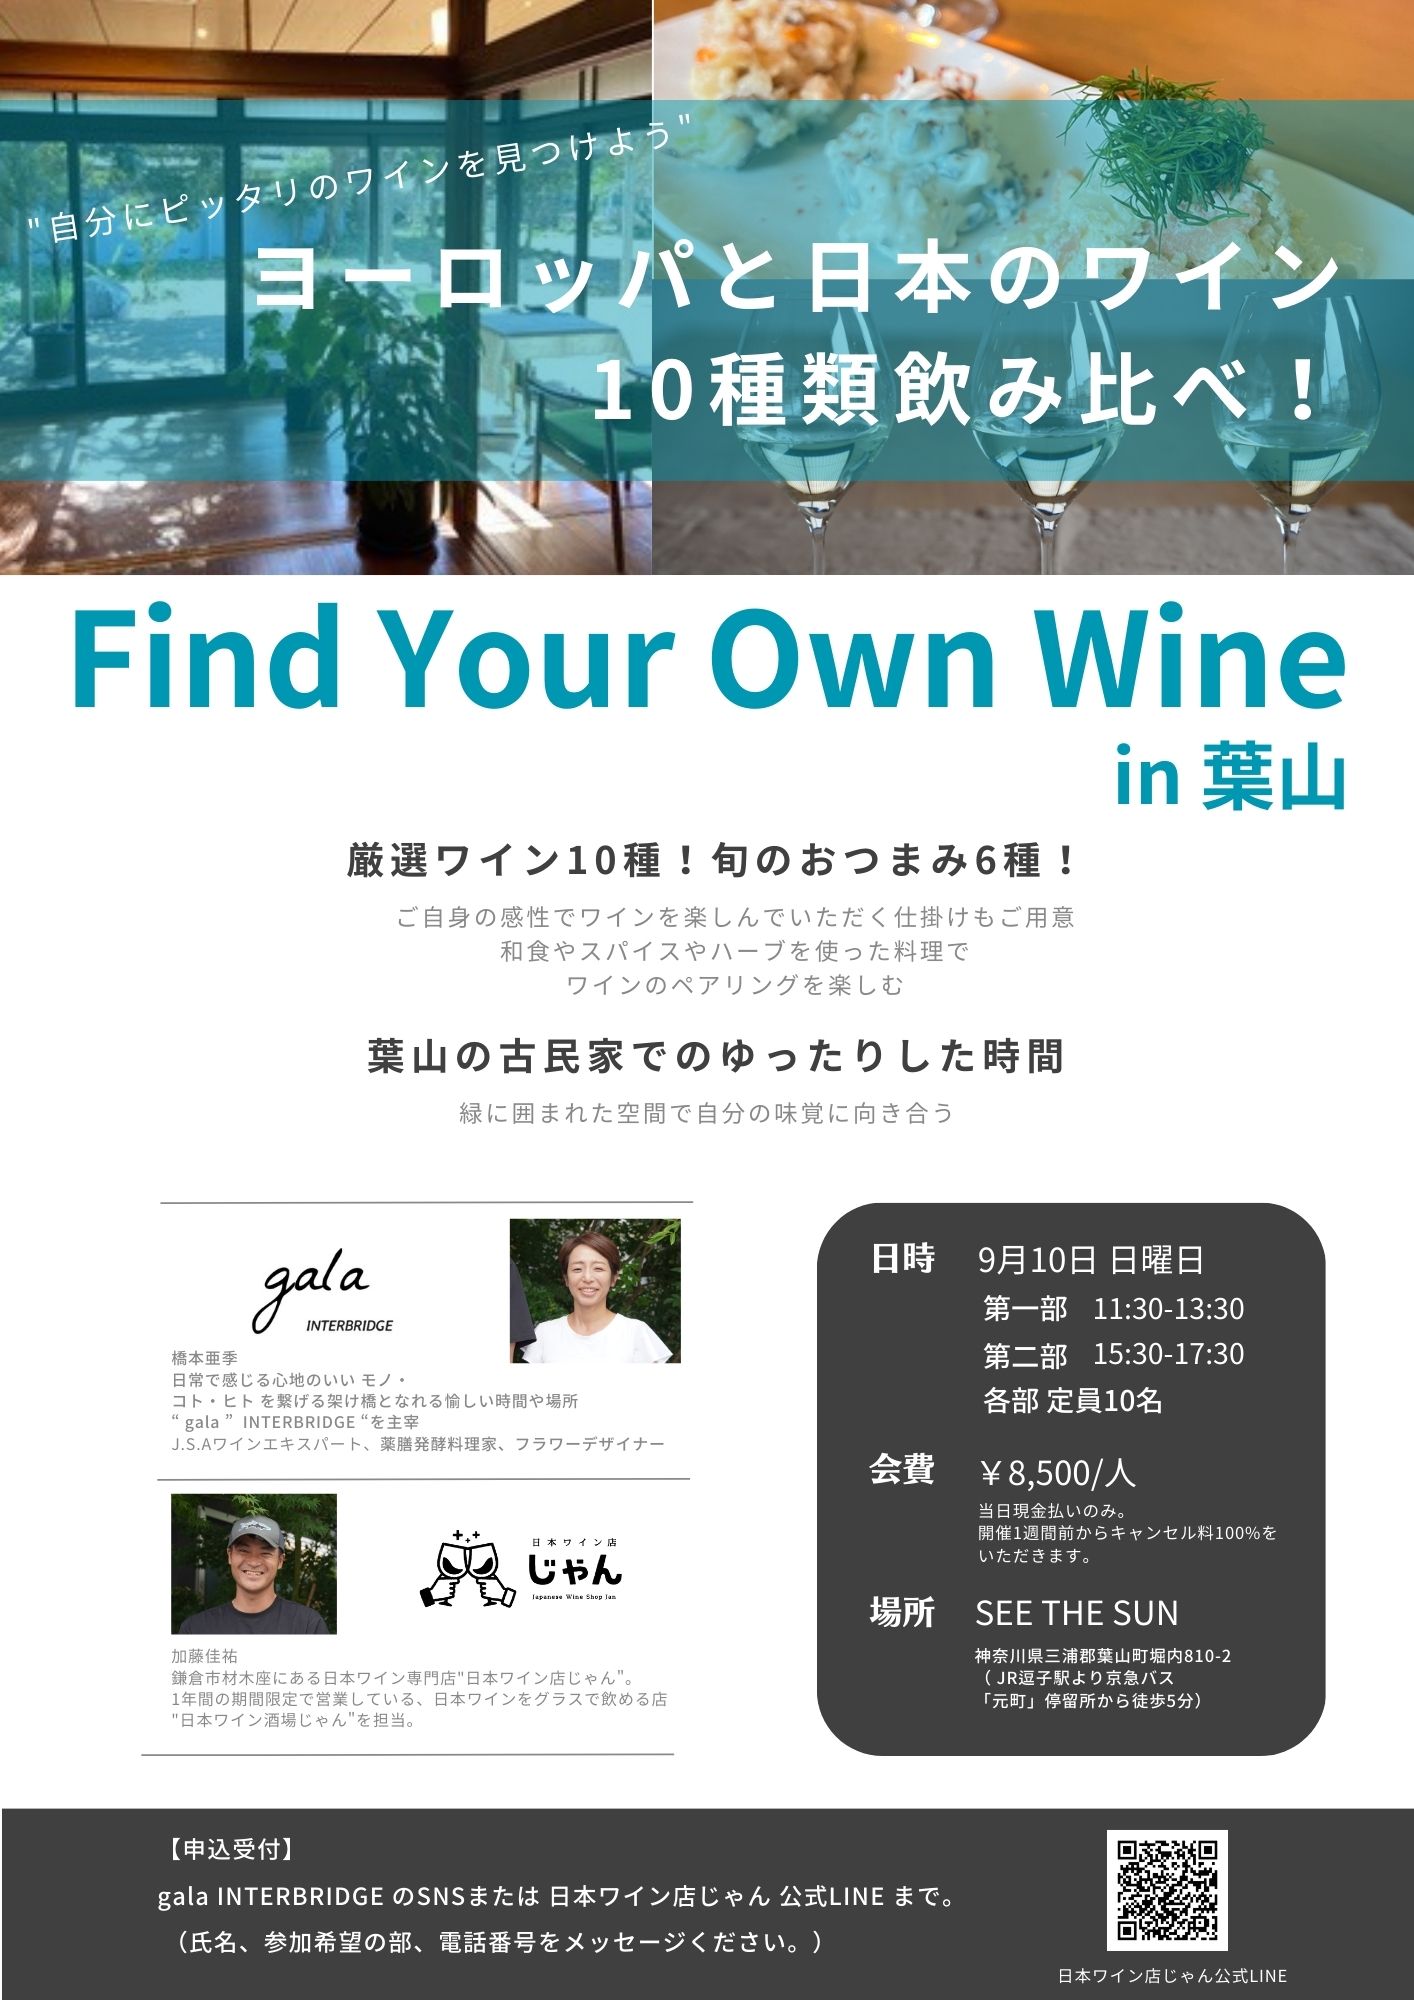 Find Your Own Wine